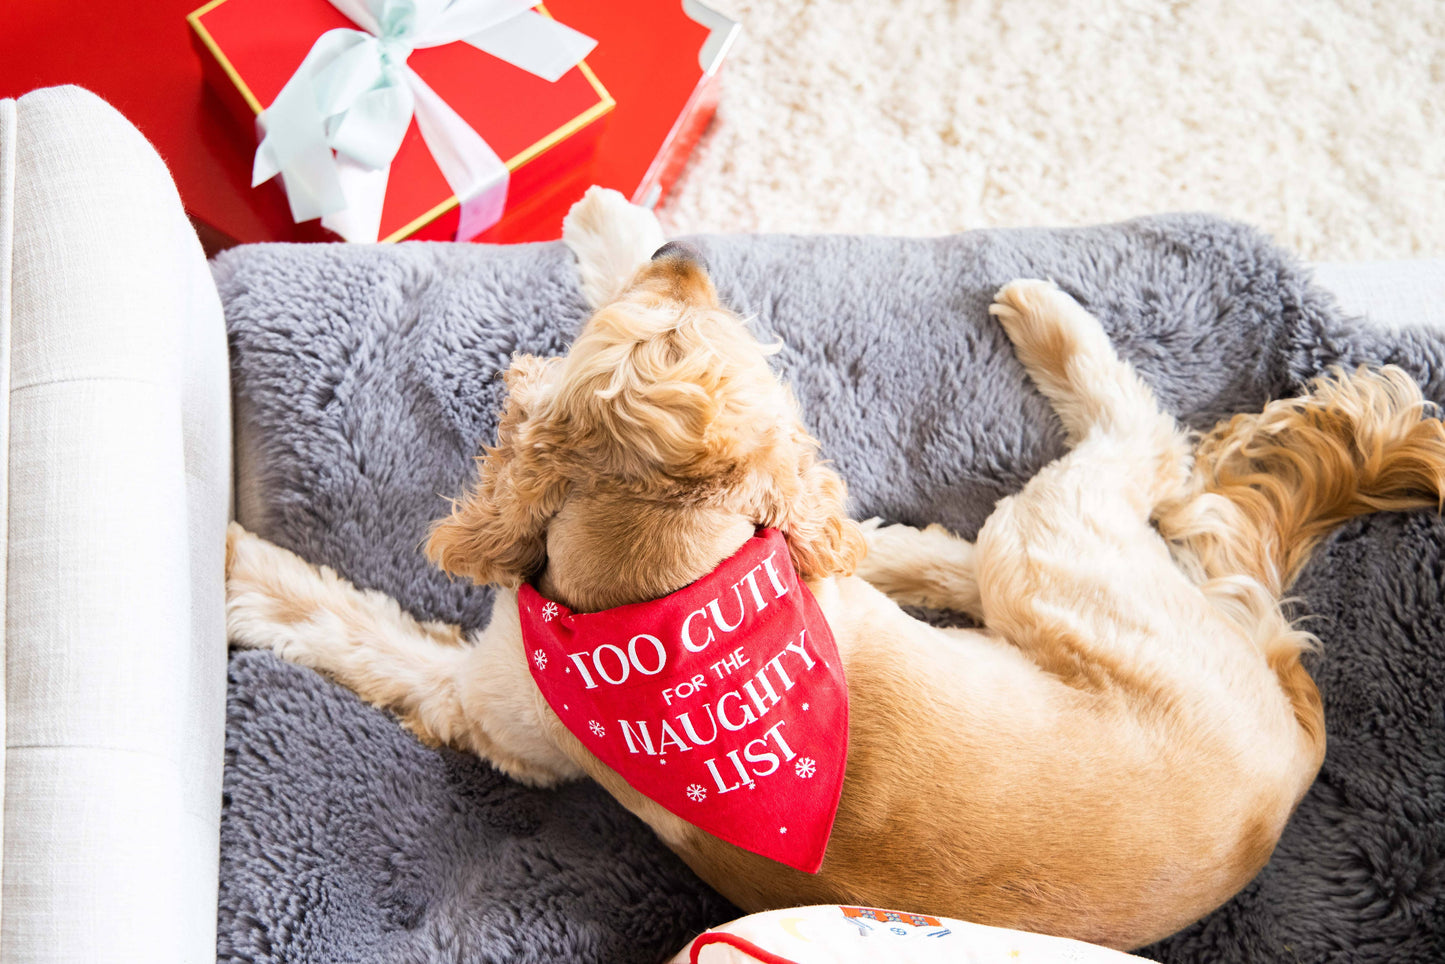 Tan dog laying down surrounded by Christmas decorations wearing "TOO CUTE FOR THE NAUGHTY LIST" bandana